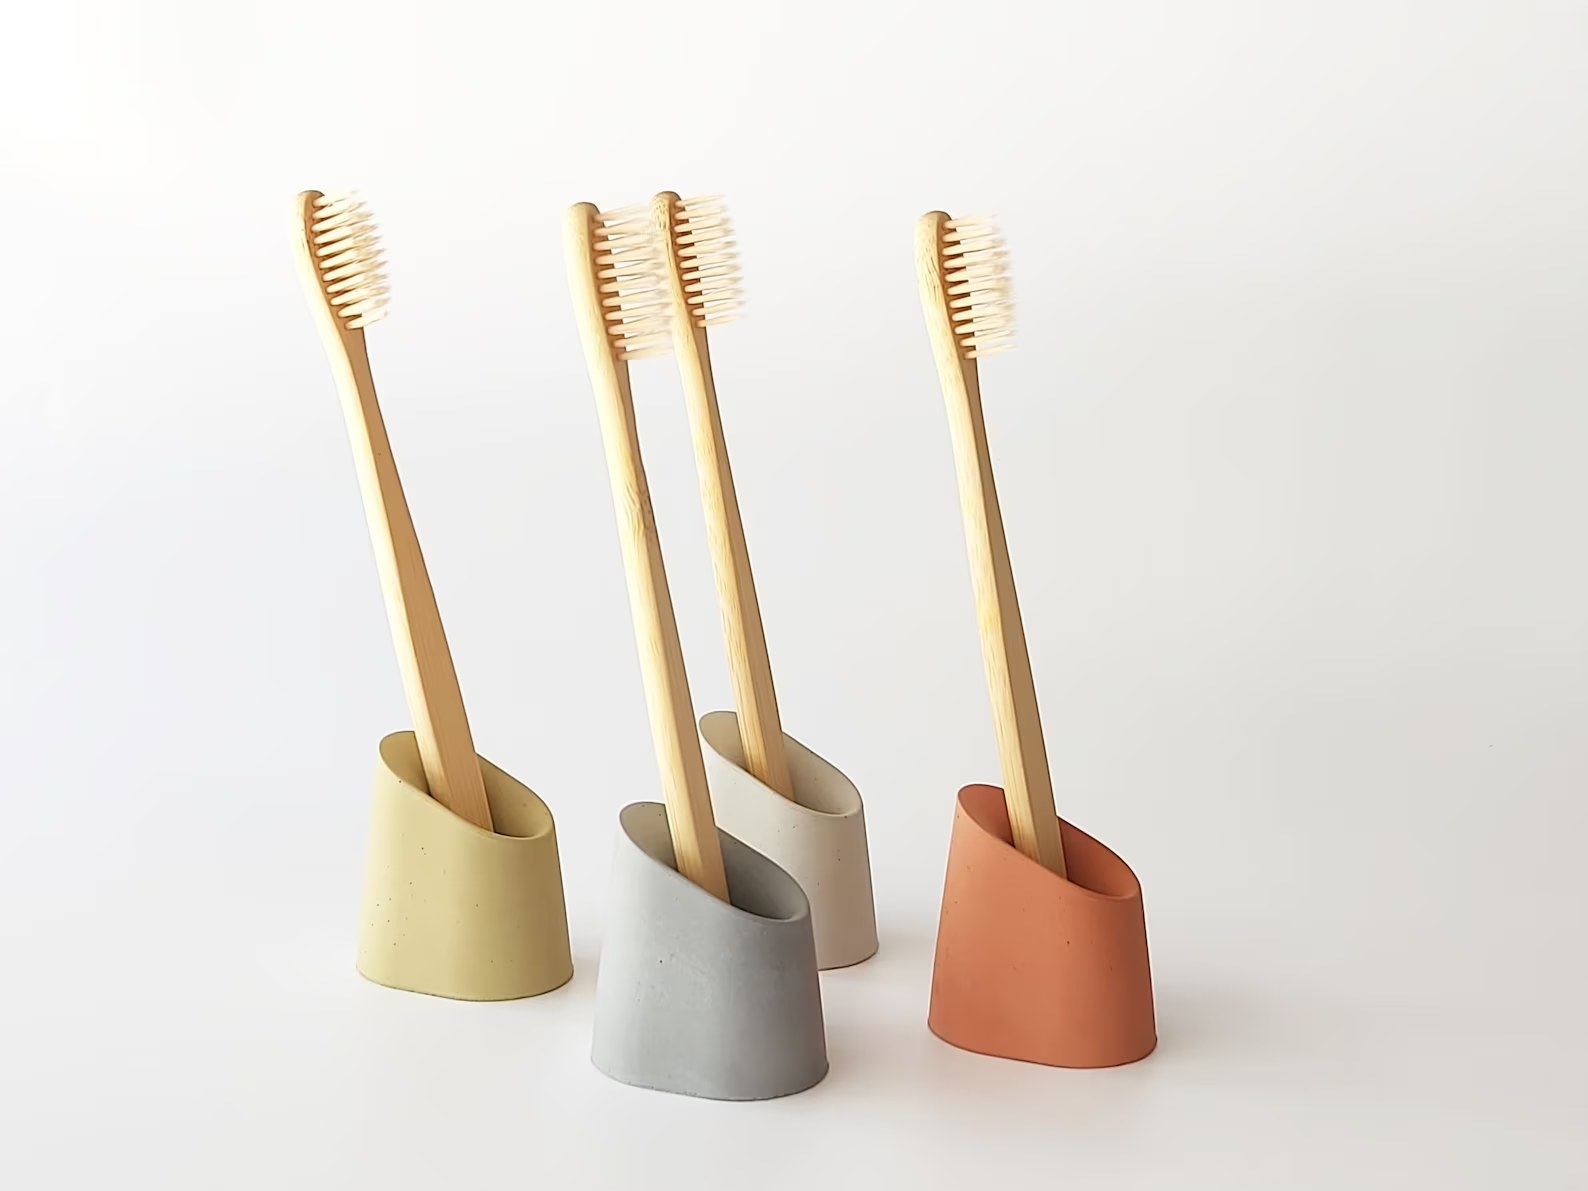 Four of the toothbrush holders in different colors, each with a toothbrush inside